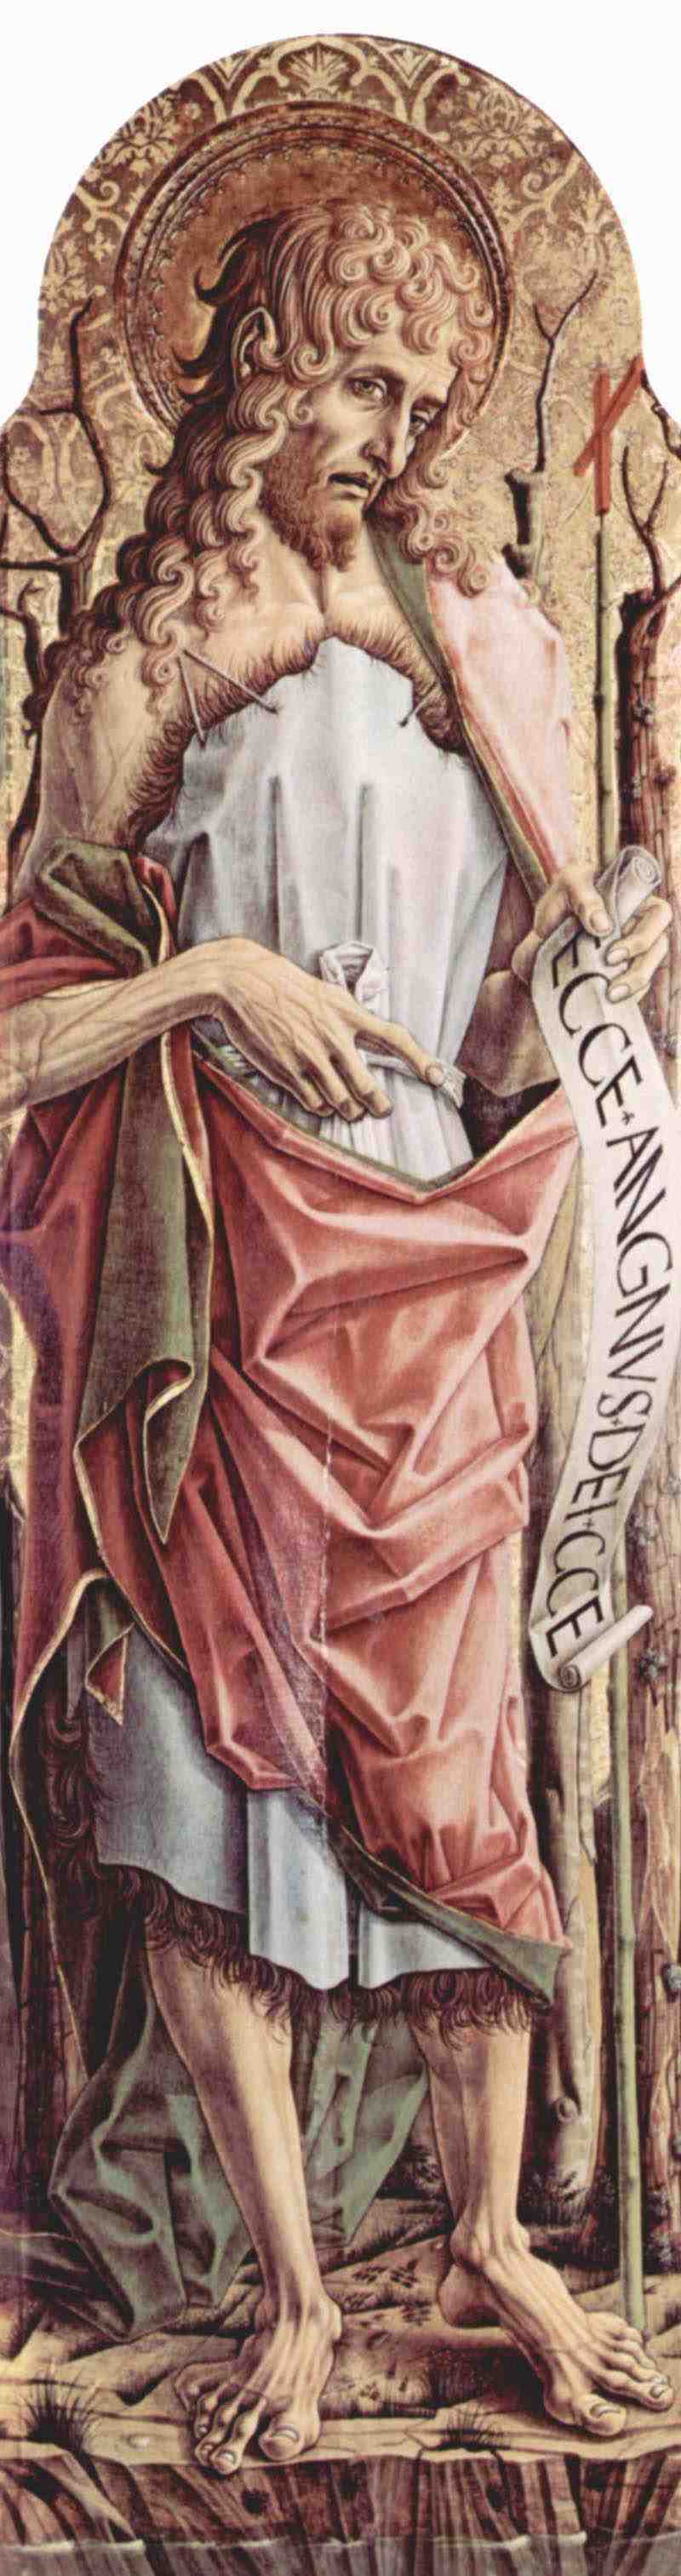 Main altar of the Cathedral of Ascoli, polyptych, left inner panel: St. John the Baptist, Carlo Crivelli